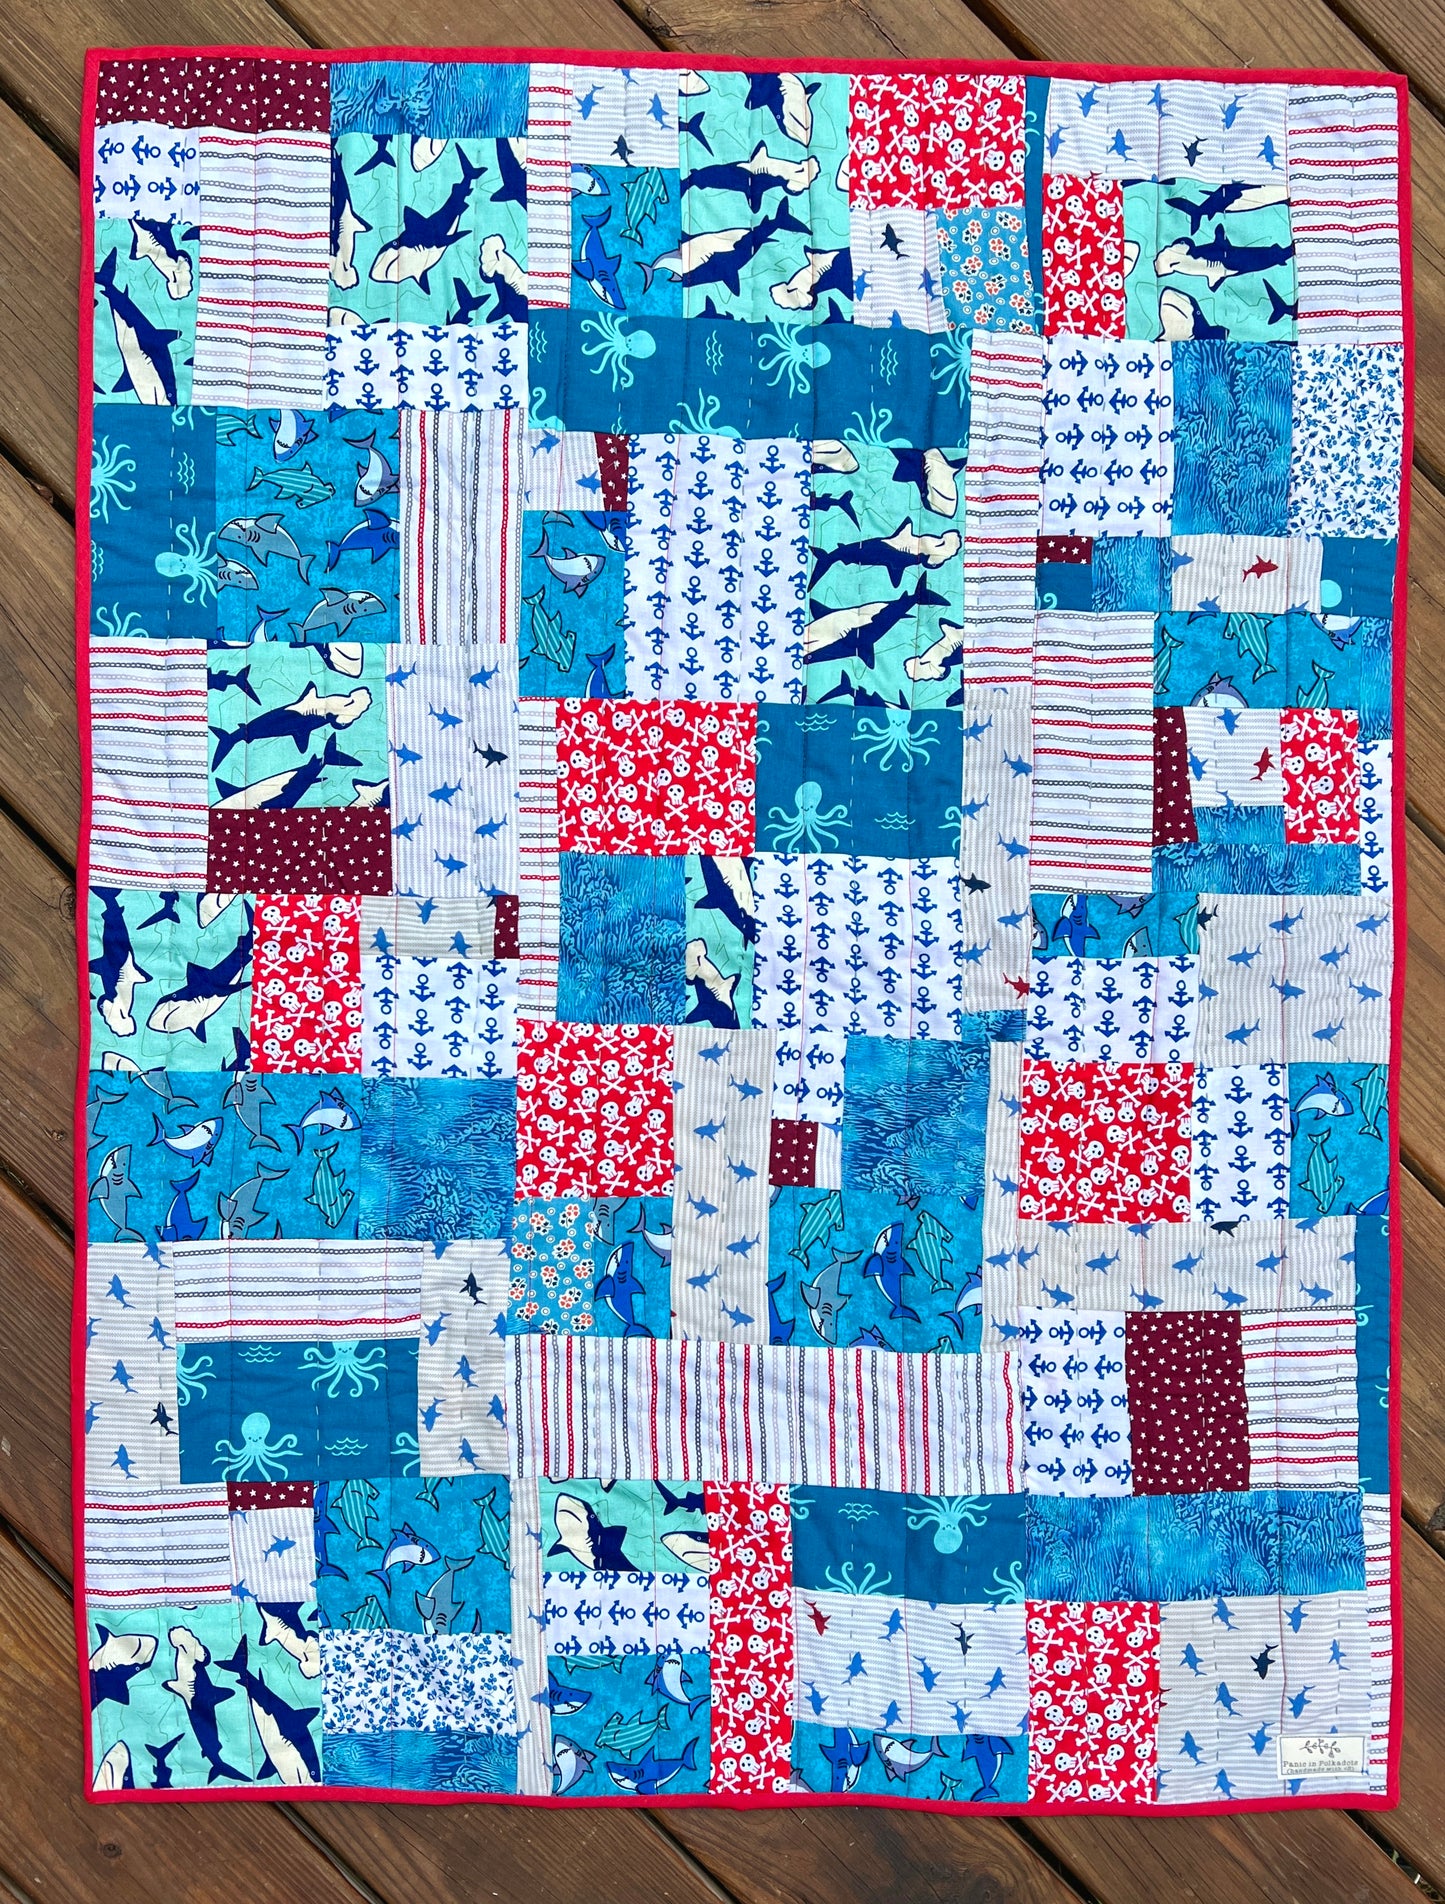 Small Quilt - Baby Blanket - Pet Quilt for Dogs or Cats - Hand-quilted Detail - Scrappy Quilt Art